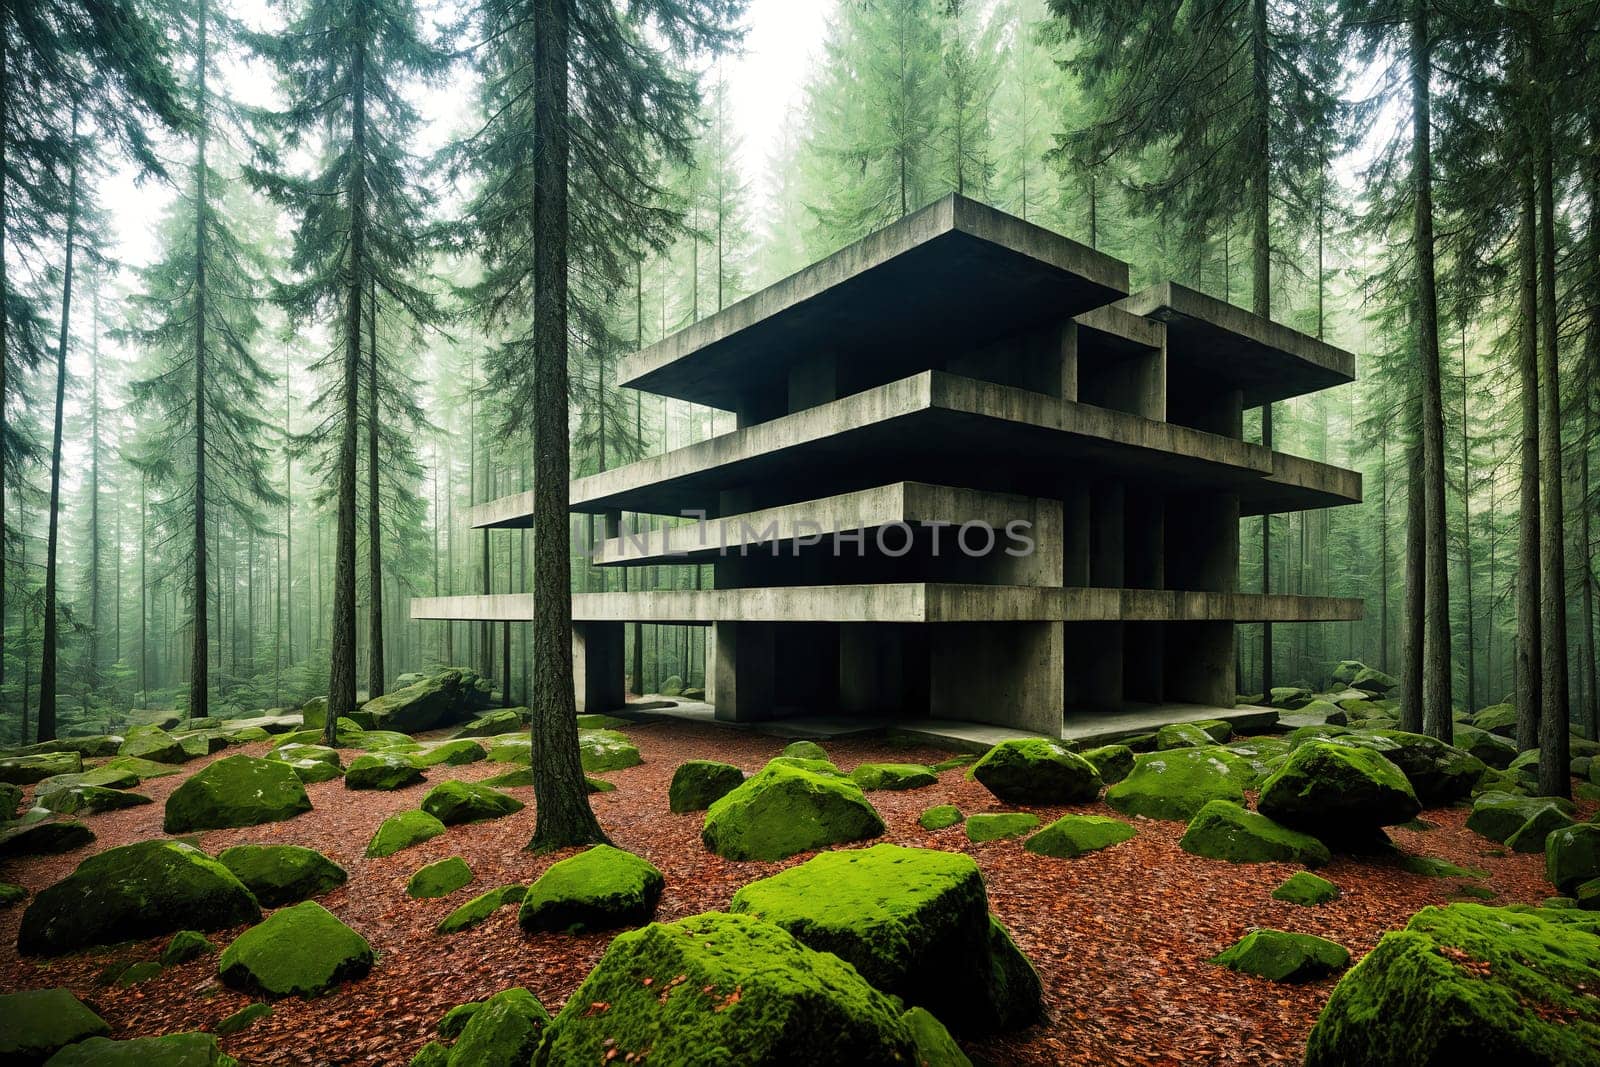 A large concrete building is surrounded by trees and rocks. The building is tall and has a modern design. Scene is serene and peaceful, as the natural elements of the forest